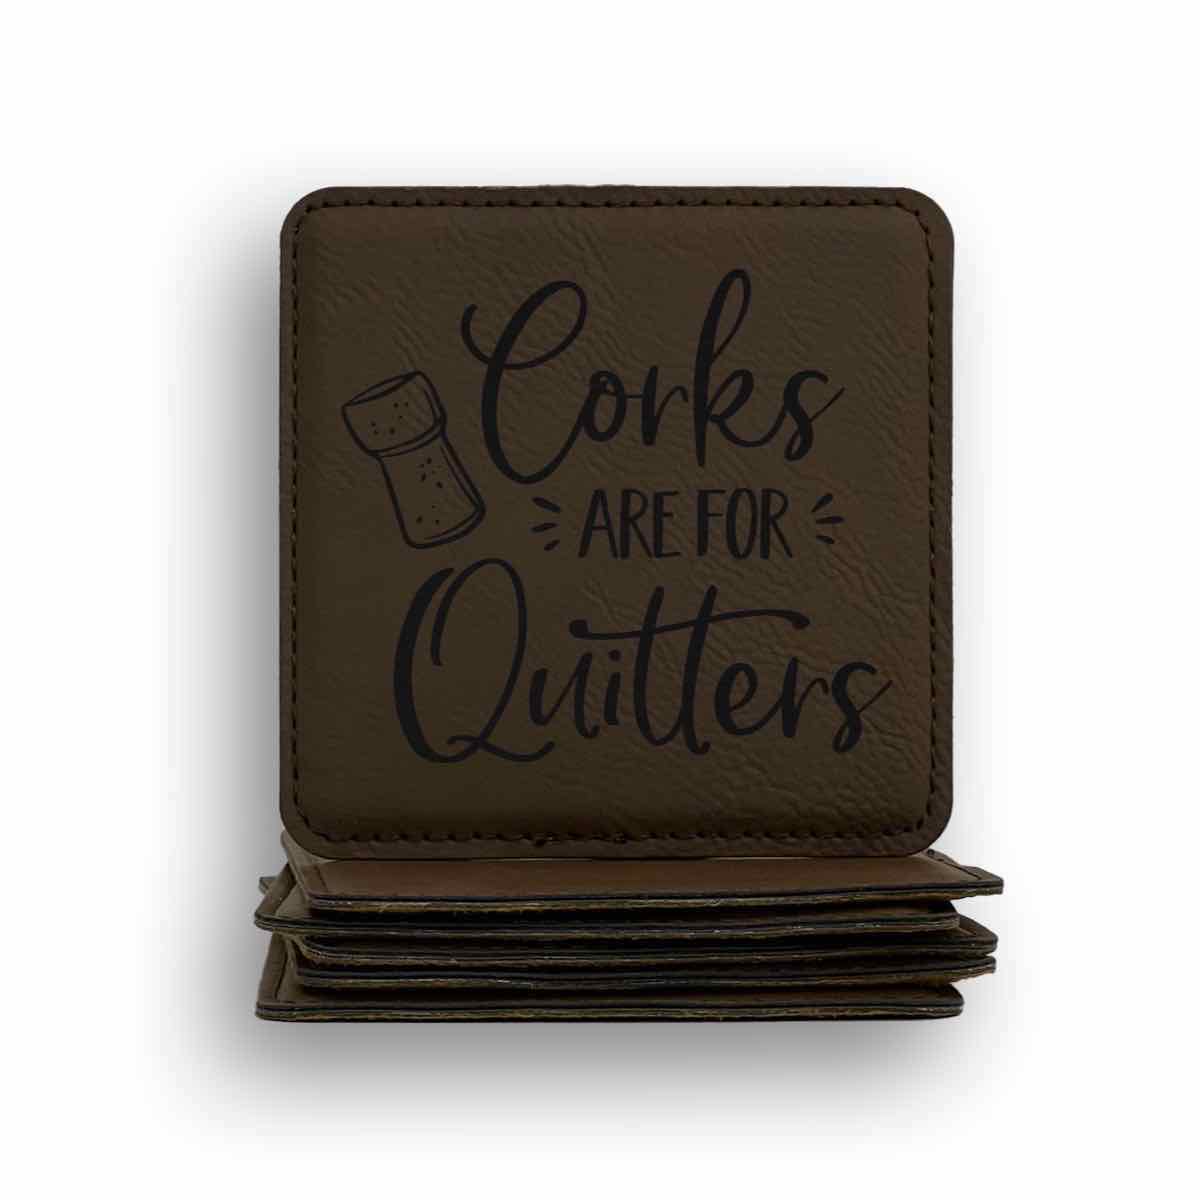 Corks Are For Coaster